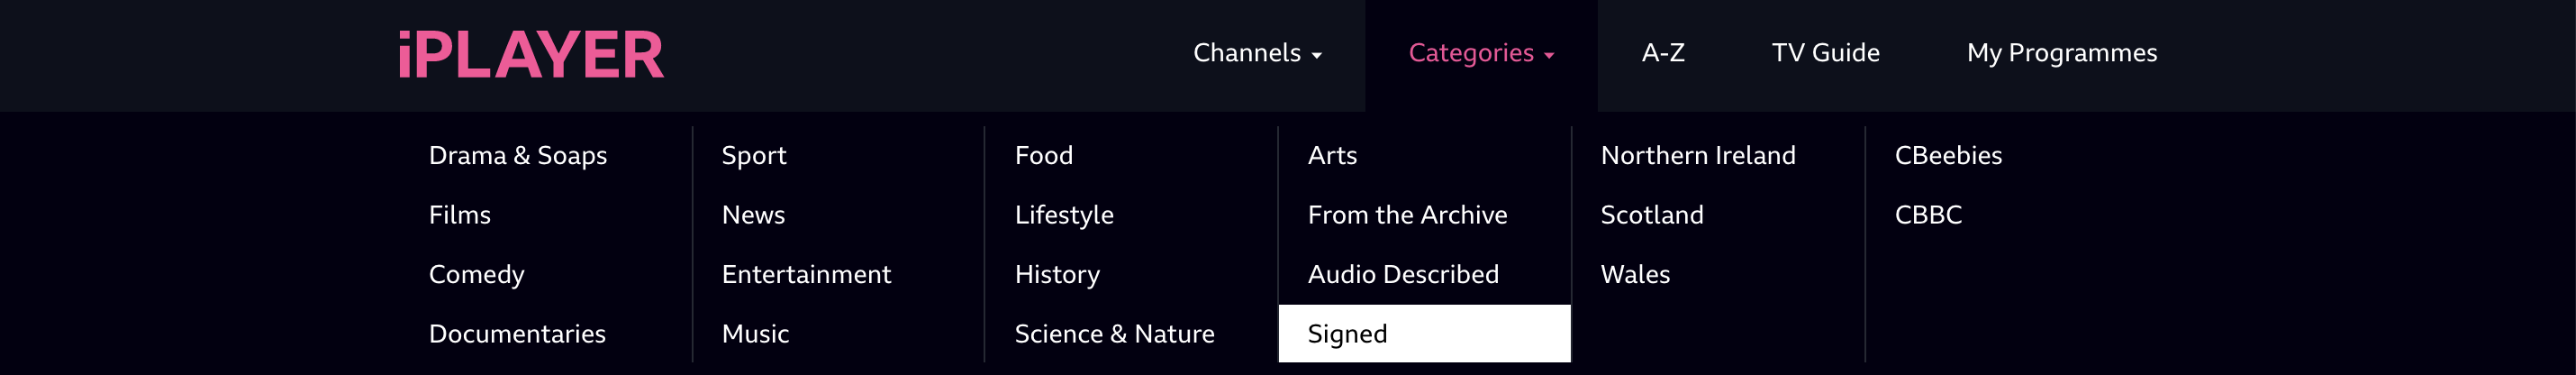 The open iPlayer category menu with the signed category highlighted. Other categories include film, drama and soaps, entertainment, audio described etc.